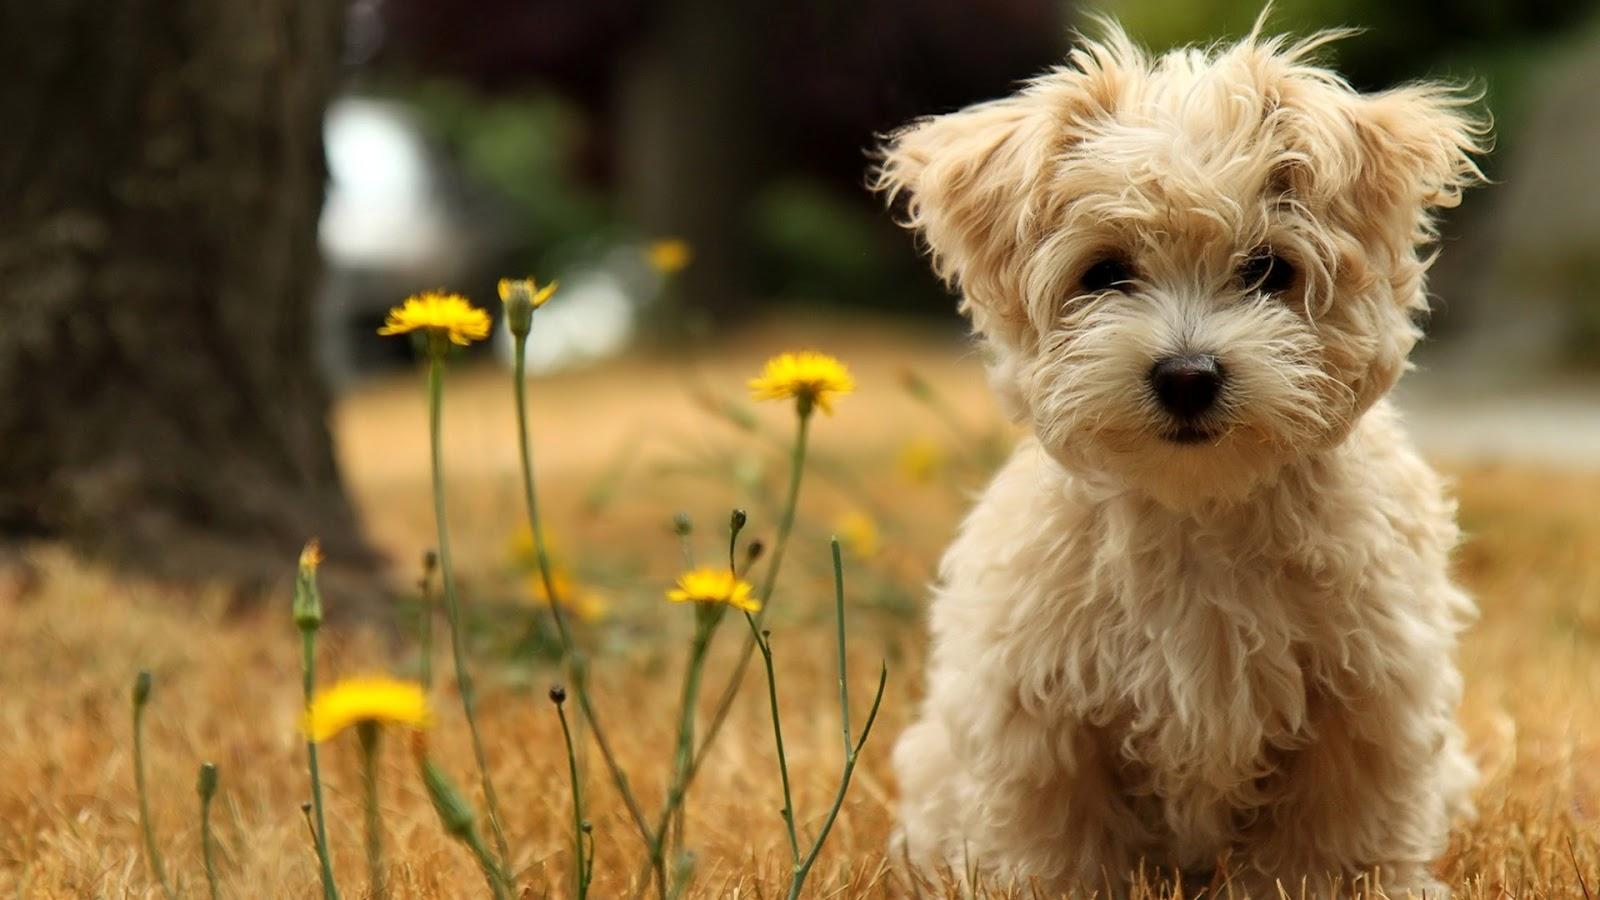 Beautiful【Dogs】Photos and Wallpaper free download